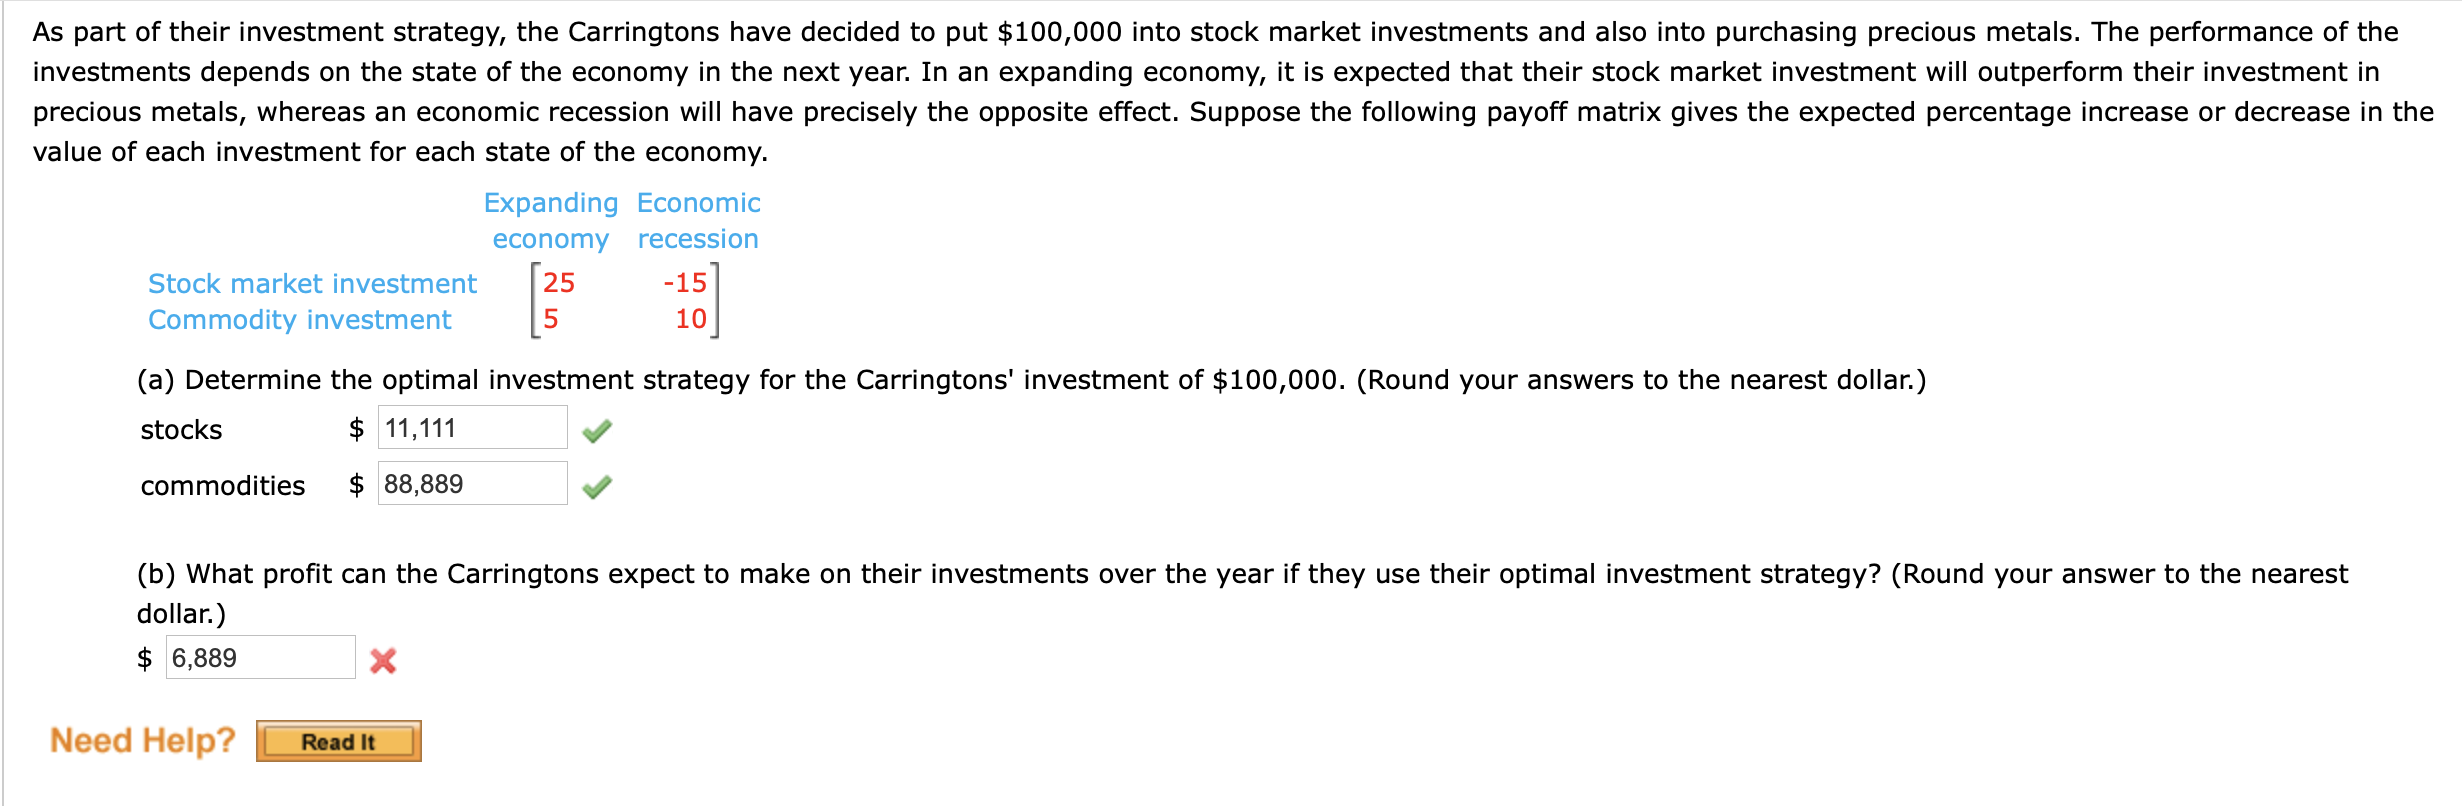 As part of their investment strategy, the Carringtons have decided to put $100,000 into stock market investments and also into purchasing precious metals. The performance of the
investments depends on the state of the economy in the next year. In an expanding economy, it is expected that their stock market investment will outperform their investment in
precious metals, whereas an economic recession will have precisely the opposite effect. Suppose the following payoff matrix gives the expected percentage increase or decrease in the
value of each investment for each state of the economy.
Expanding Economic
economy recession
Stock market investment
25
-15
Commodity investment
5
10
(a) Determine the optimal investment strategy for the Carringtons' investment of $100,000. (Round your answers to the nearest dollar.)
stocks
$ 11,111
commodities
$ 88,889
(b) What profit can the Carringtons expect to make on their investments over the year if they use their optimal investment strategy? (Round your answer to the nearest
dollar.)
$ 6,889
